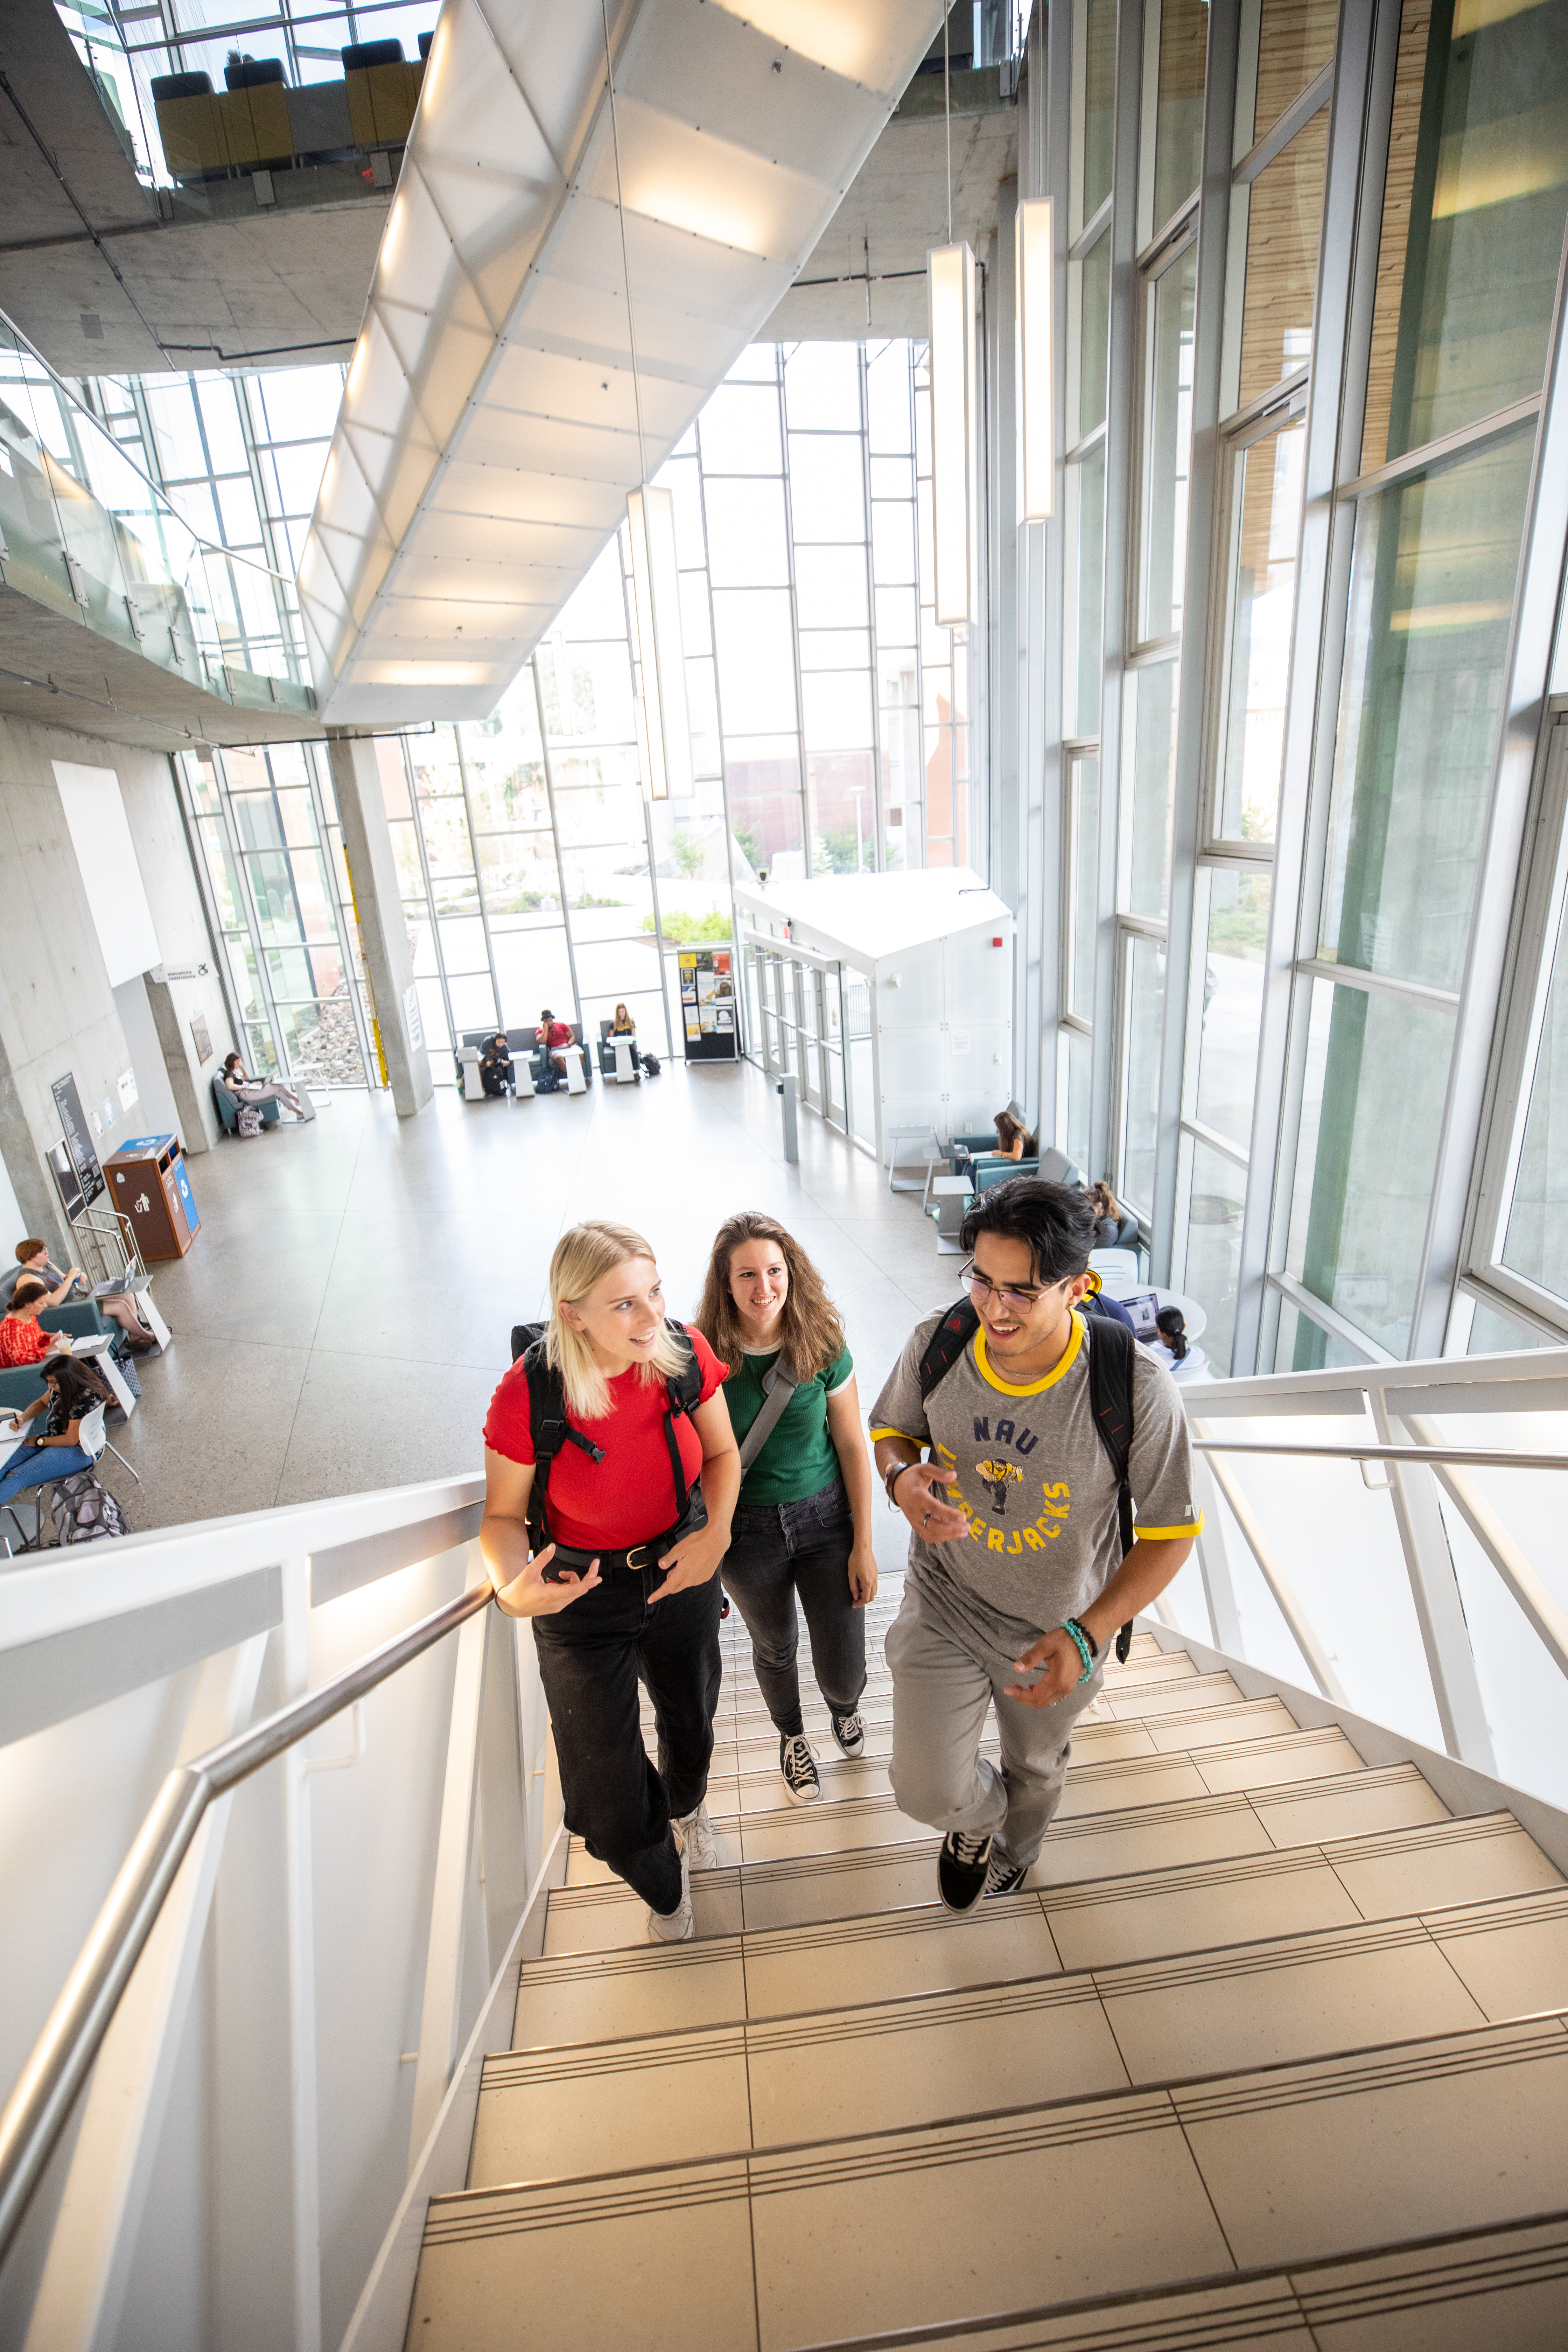 A photo of students walking up the stairs.